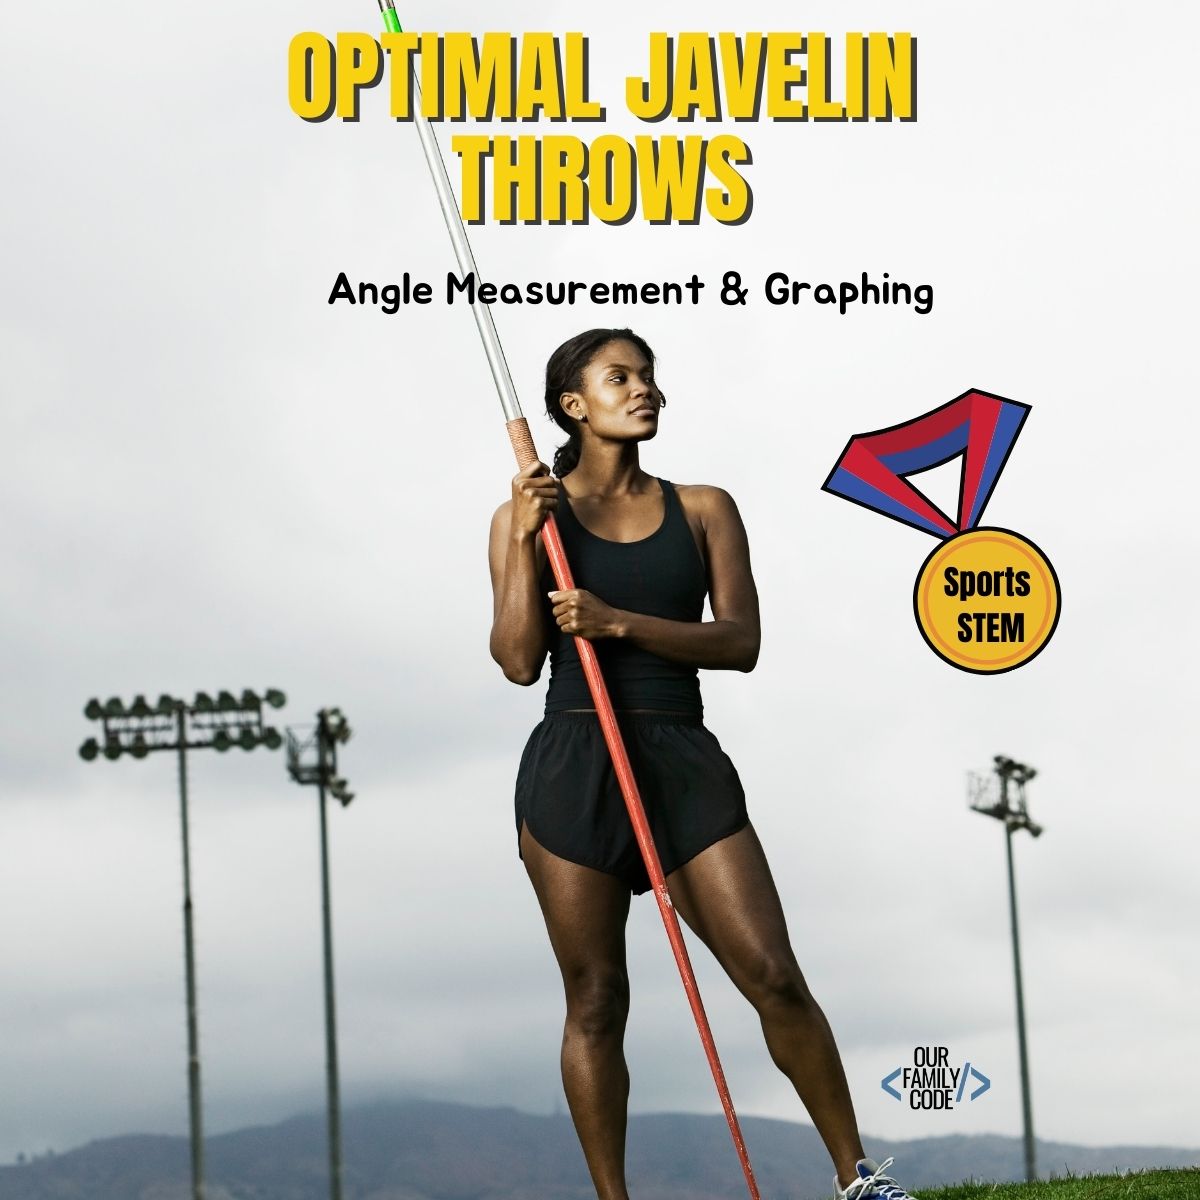 A picture of a javelin athlete standing with a javelin with text in yellow that says "optimal javelin throws", text in black that says "angle measurement and graphing", and a medal that says "sports STEM".